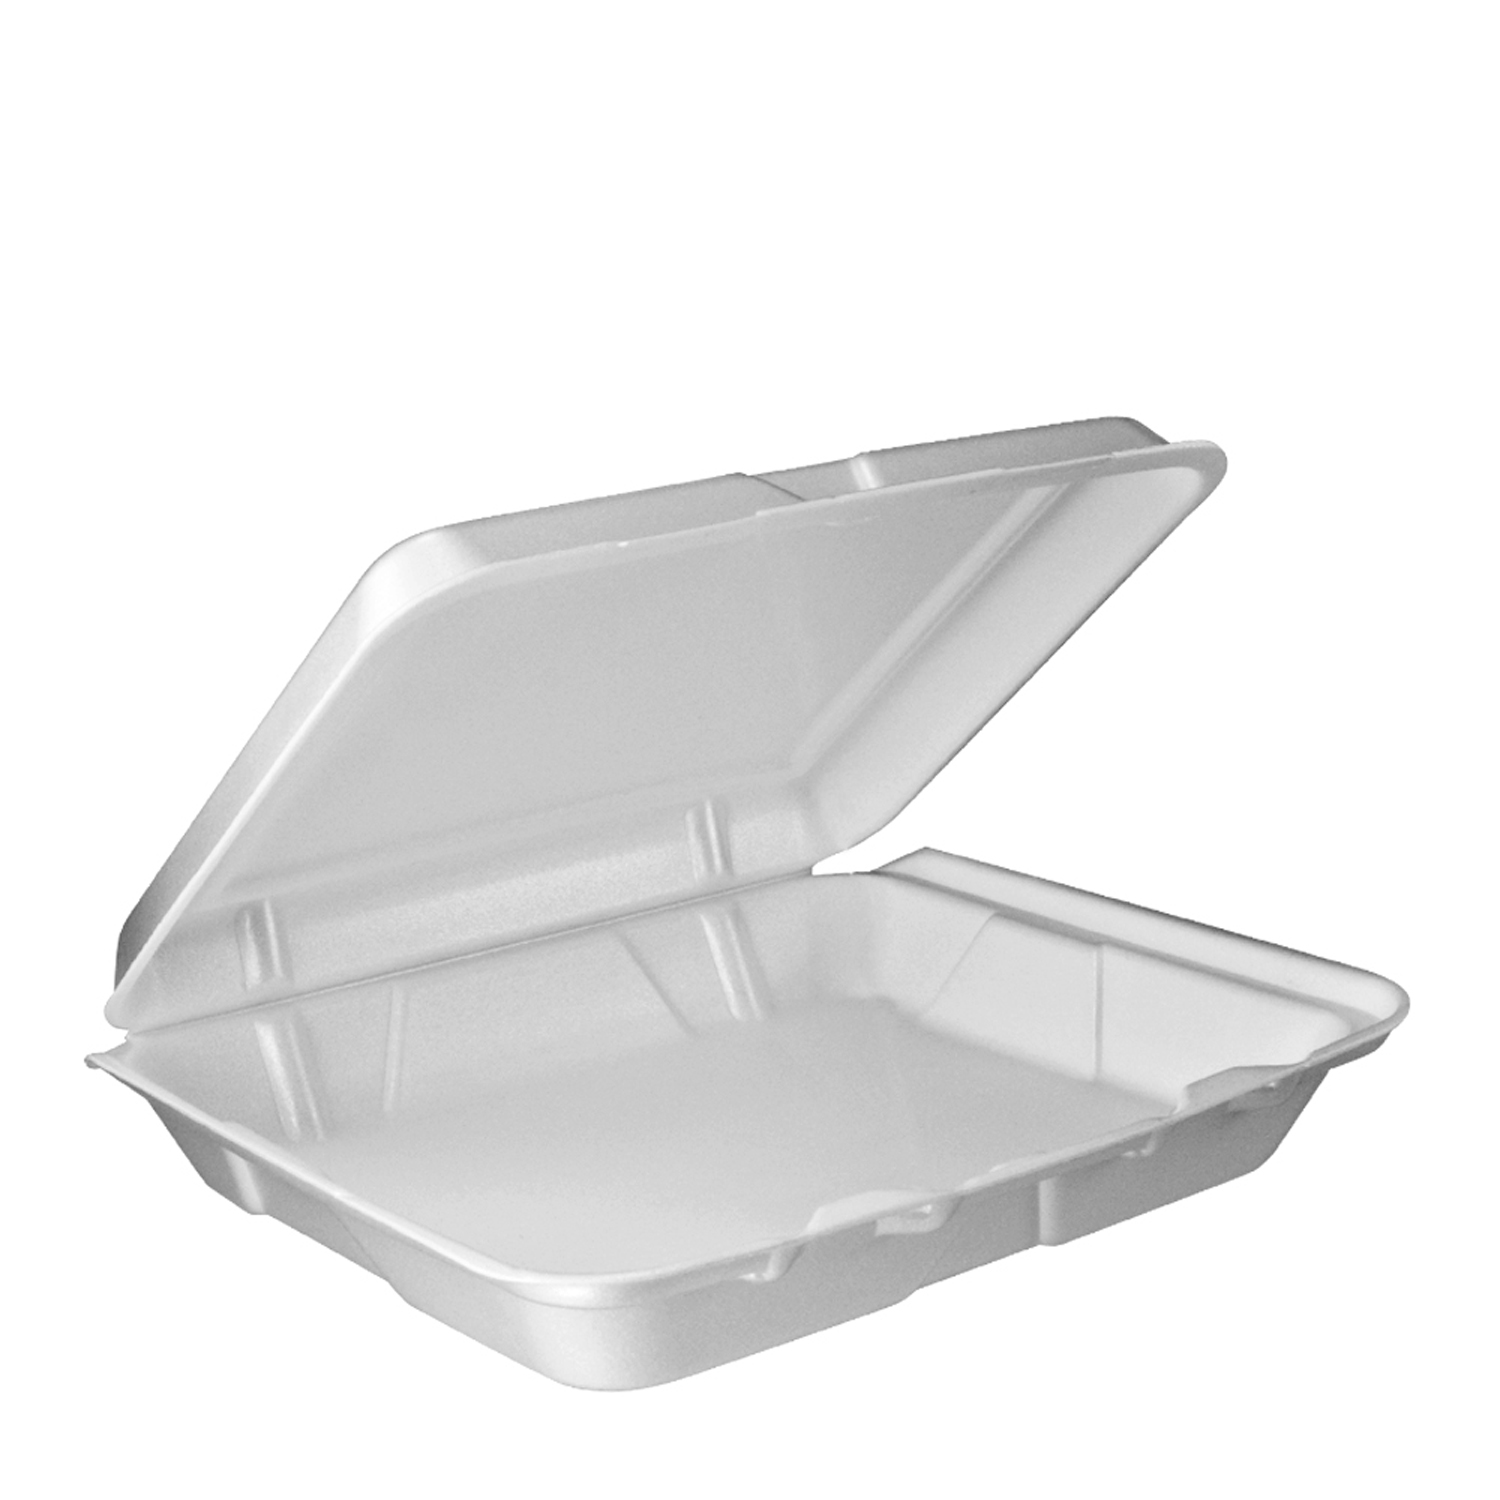 LARGE 1 COMPARTMENT HINGE TRAY(REMOVABLE LID)200